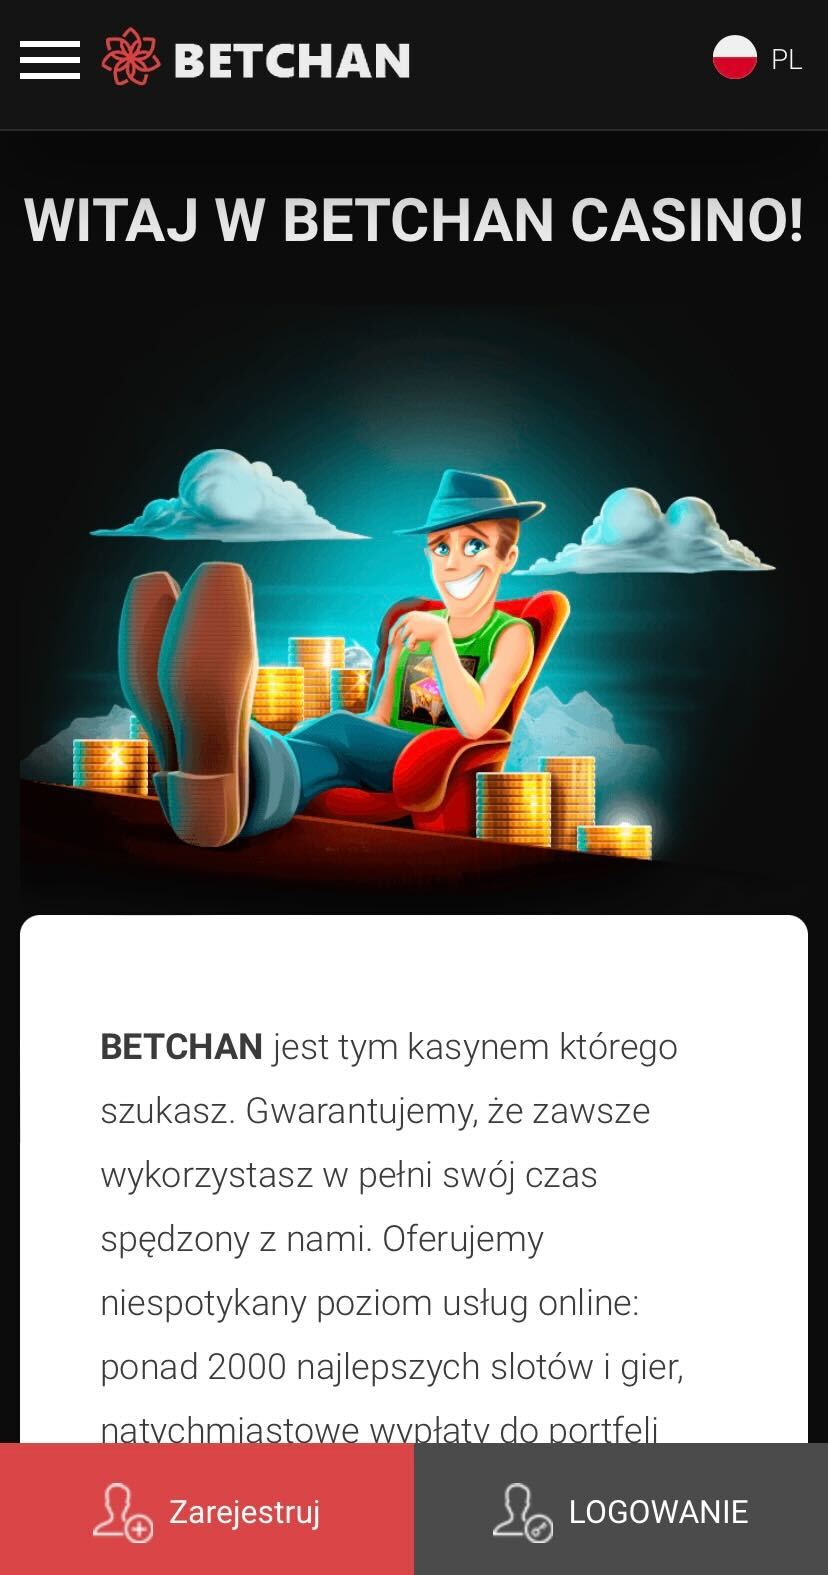 Betchan Casino Mobile Review